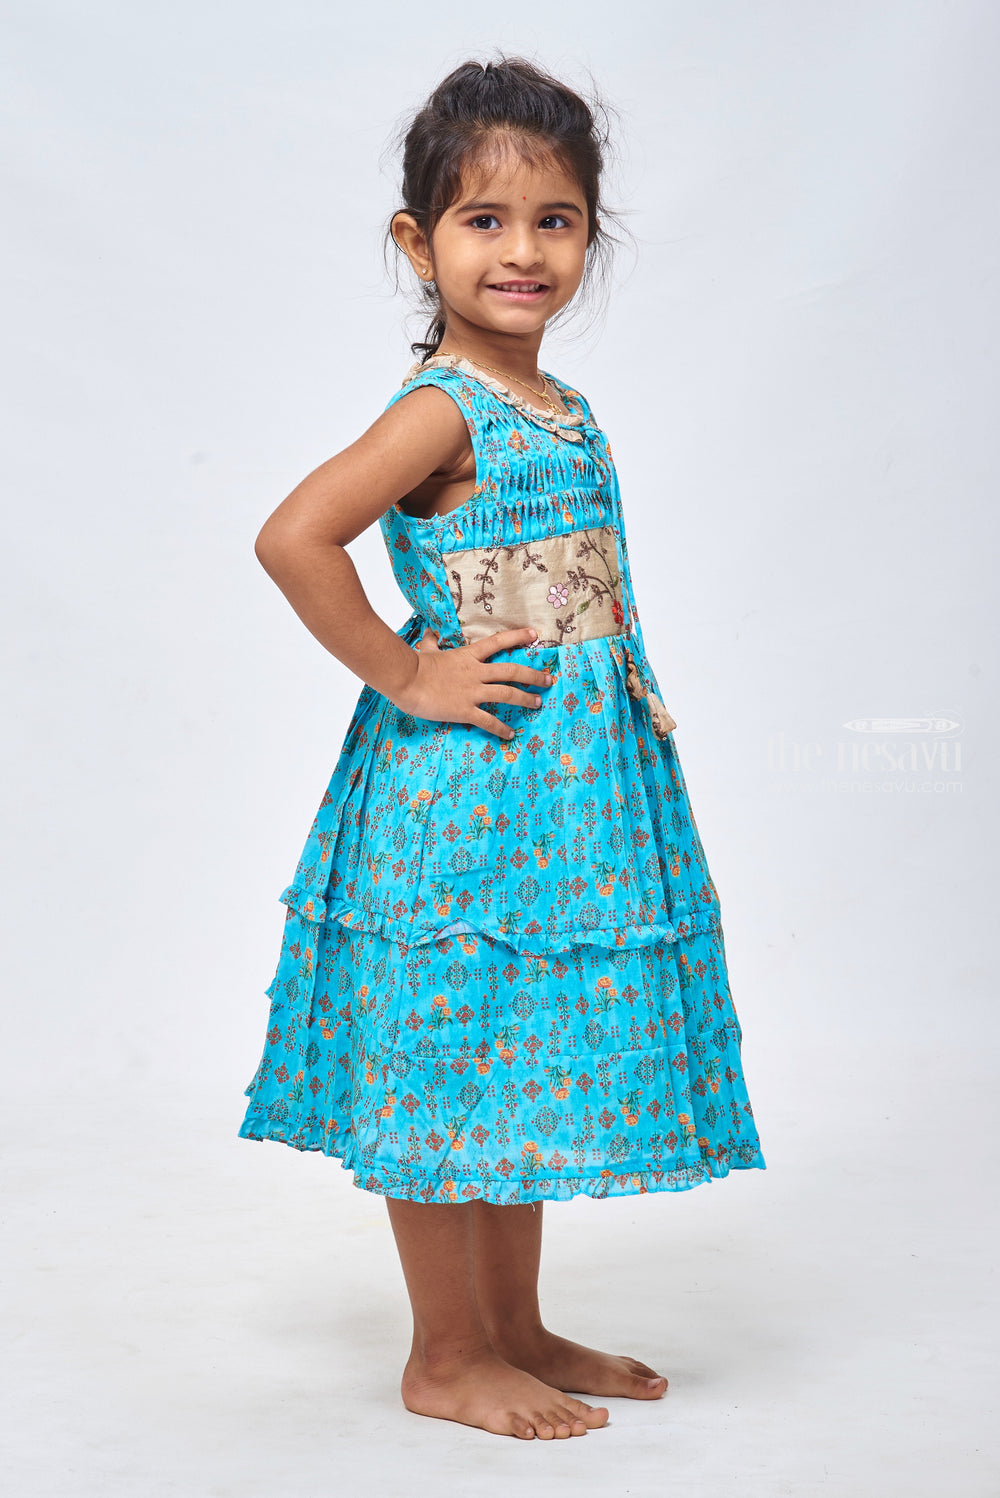 The Nesavu Girls Cotton Frock Ocean Dream: Floral Printed Pleated Blue Cotton Frock for Girls Nesavu Cute Cotton Frocks for Toddlers | Adorable Designs for Little Ones